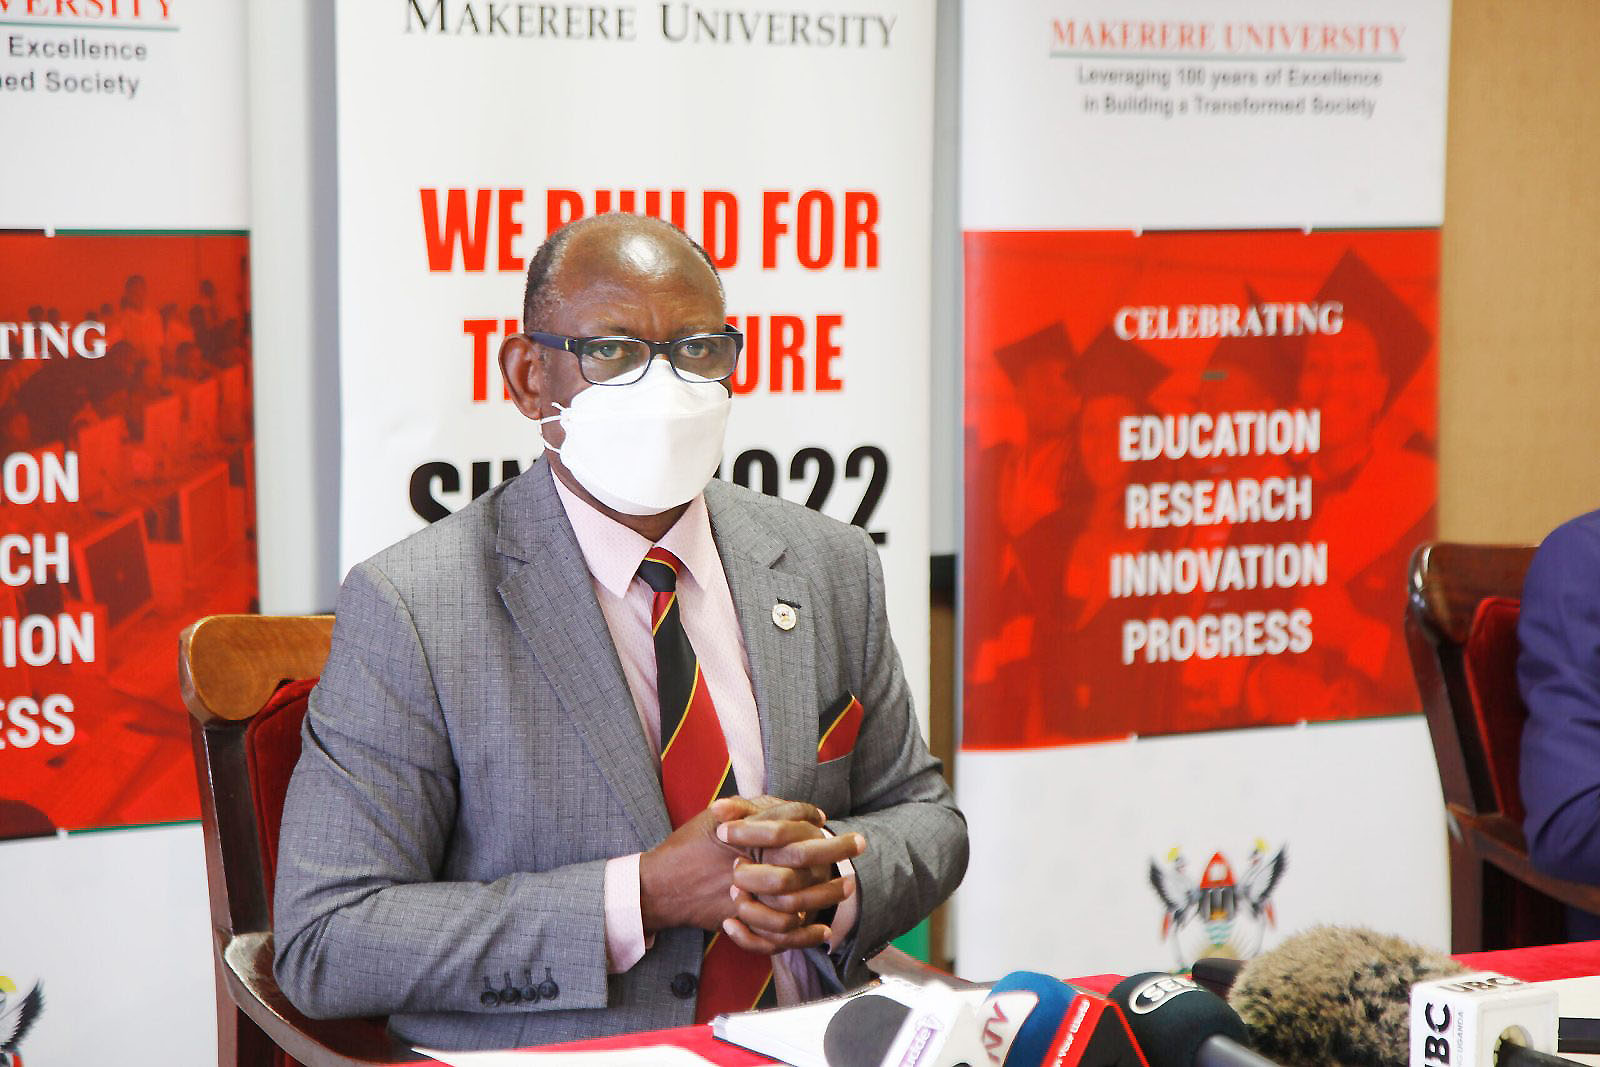 The Vice Chancellor, Prof. Barnabas Nawangwe responds to questions from journalists during the Press Conference on 7th February 2022, CTF1, Makerere University.